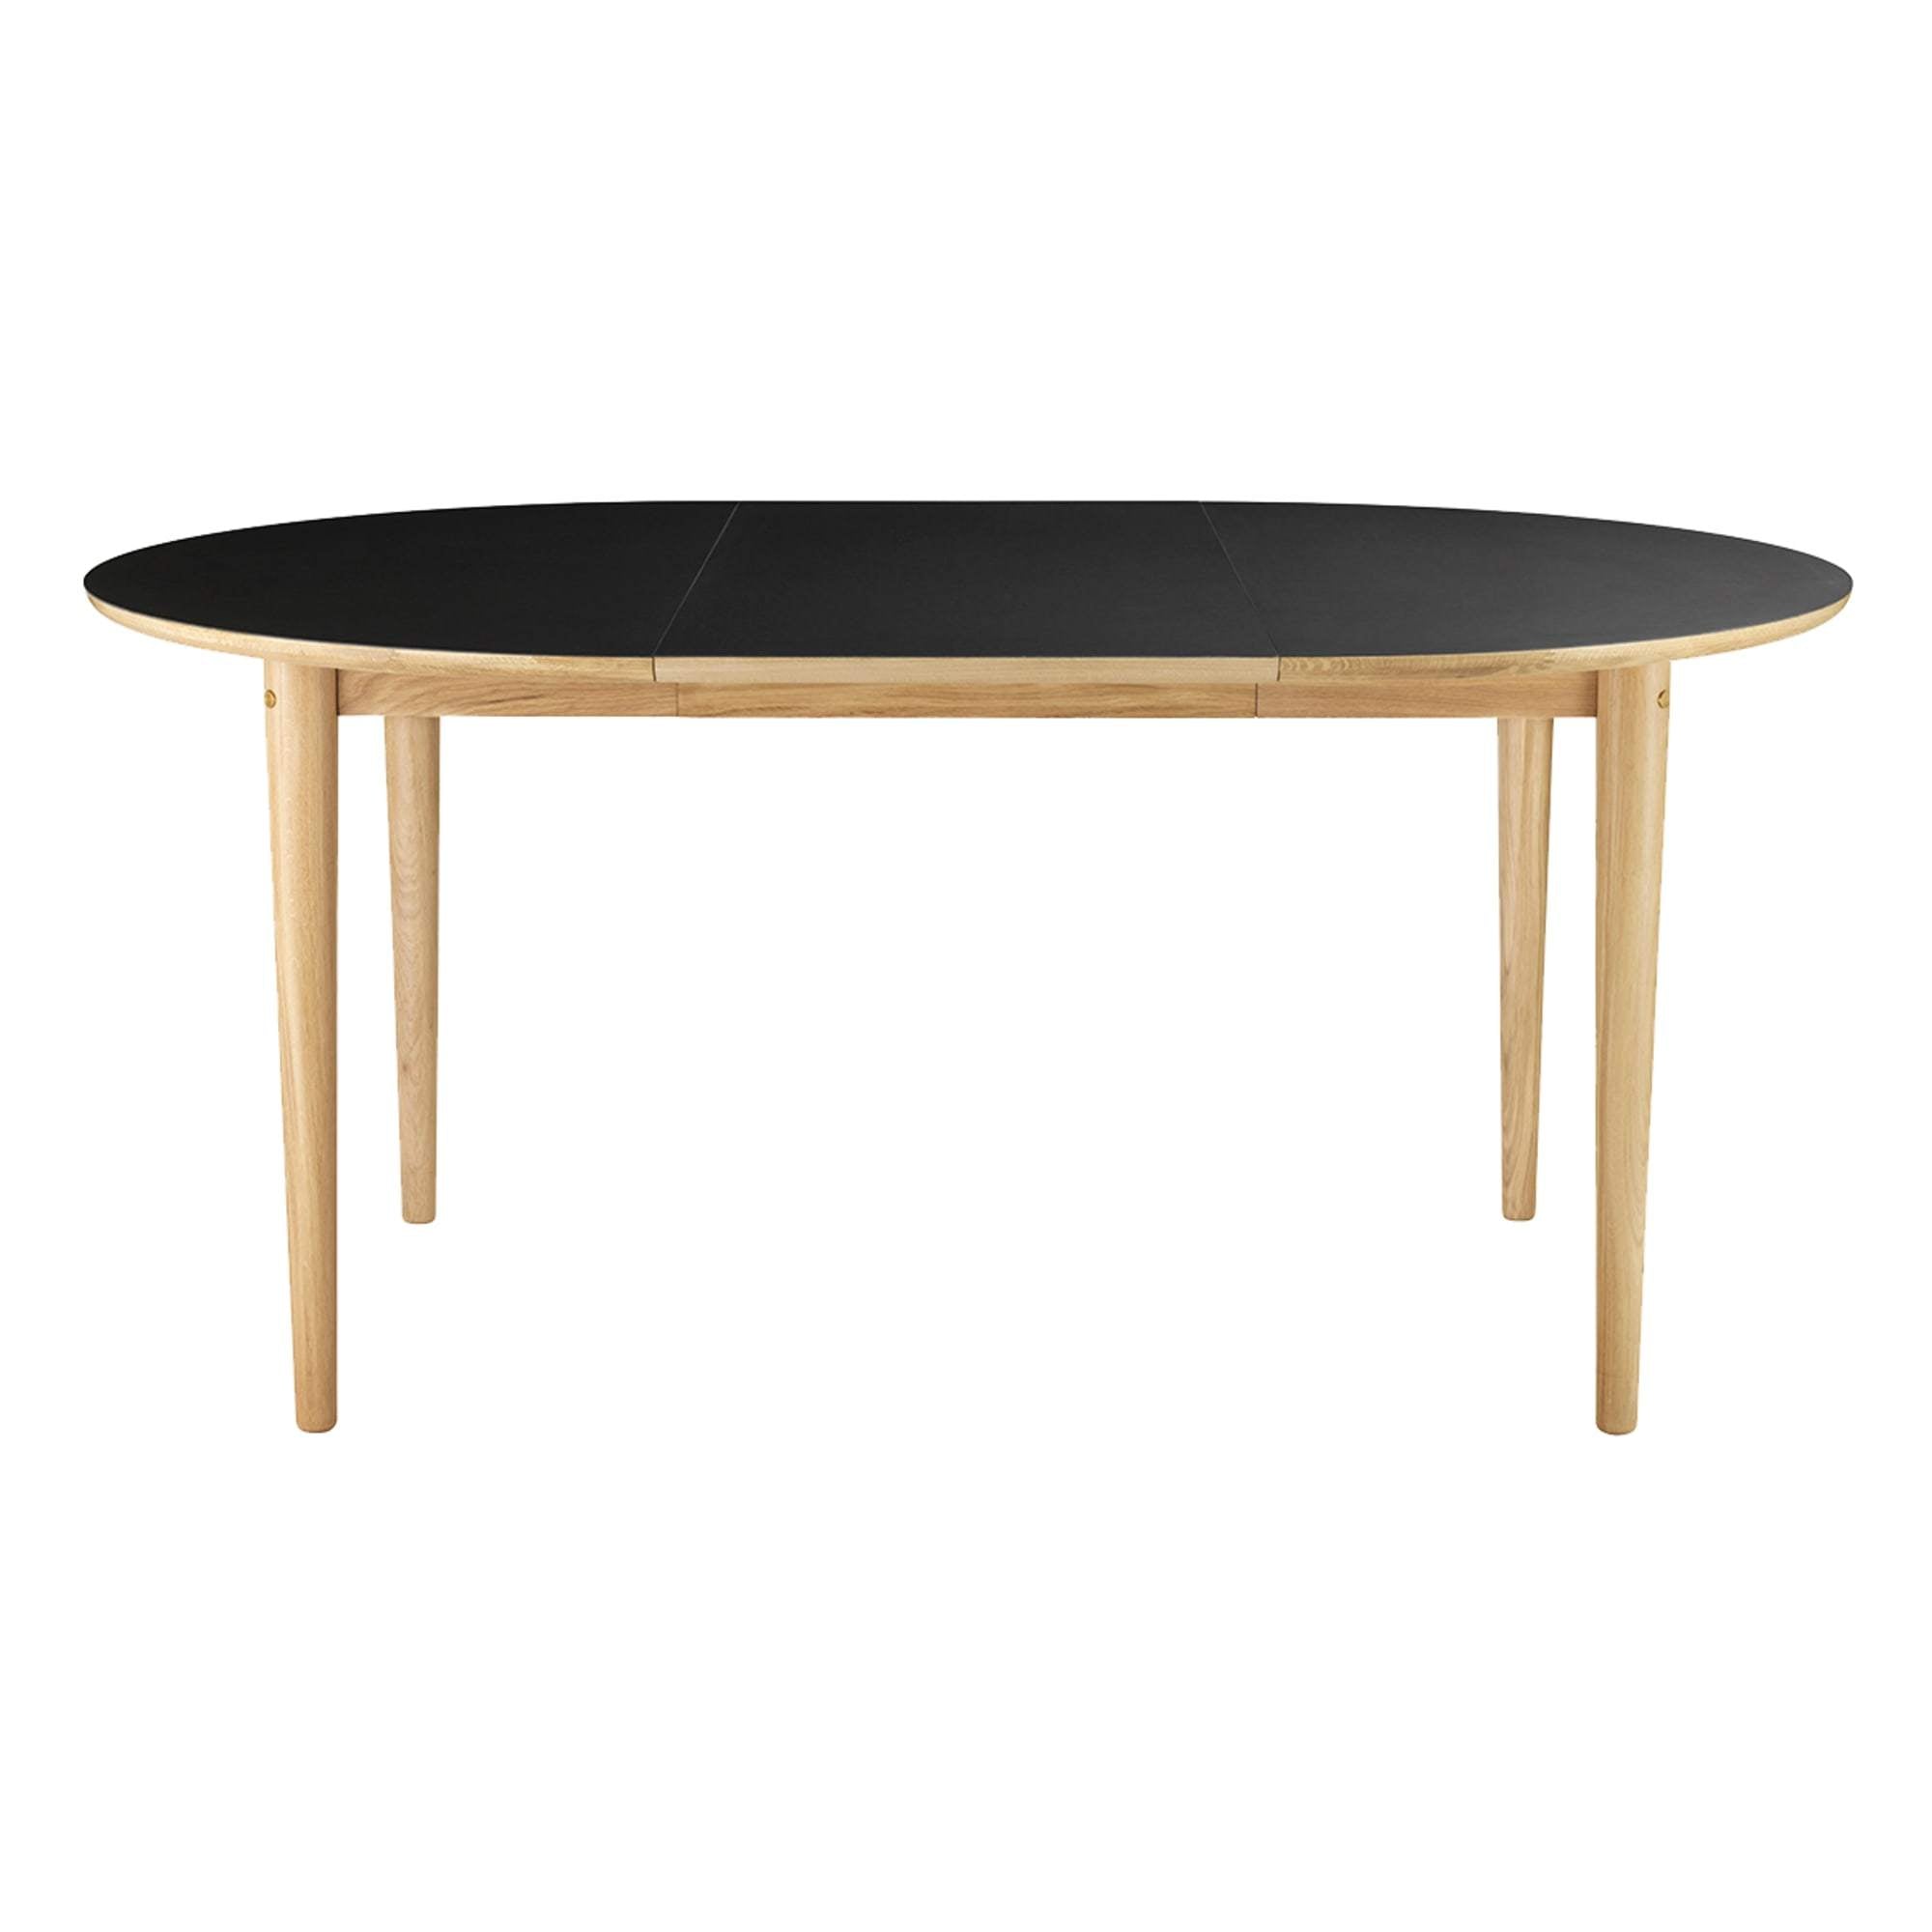 Fdb Møbler C62 E Dining Table With Pull Out Function, Natural/Black Linoleum